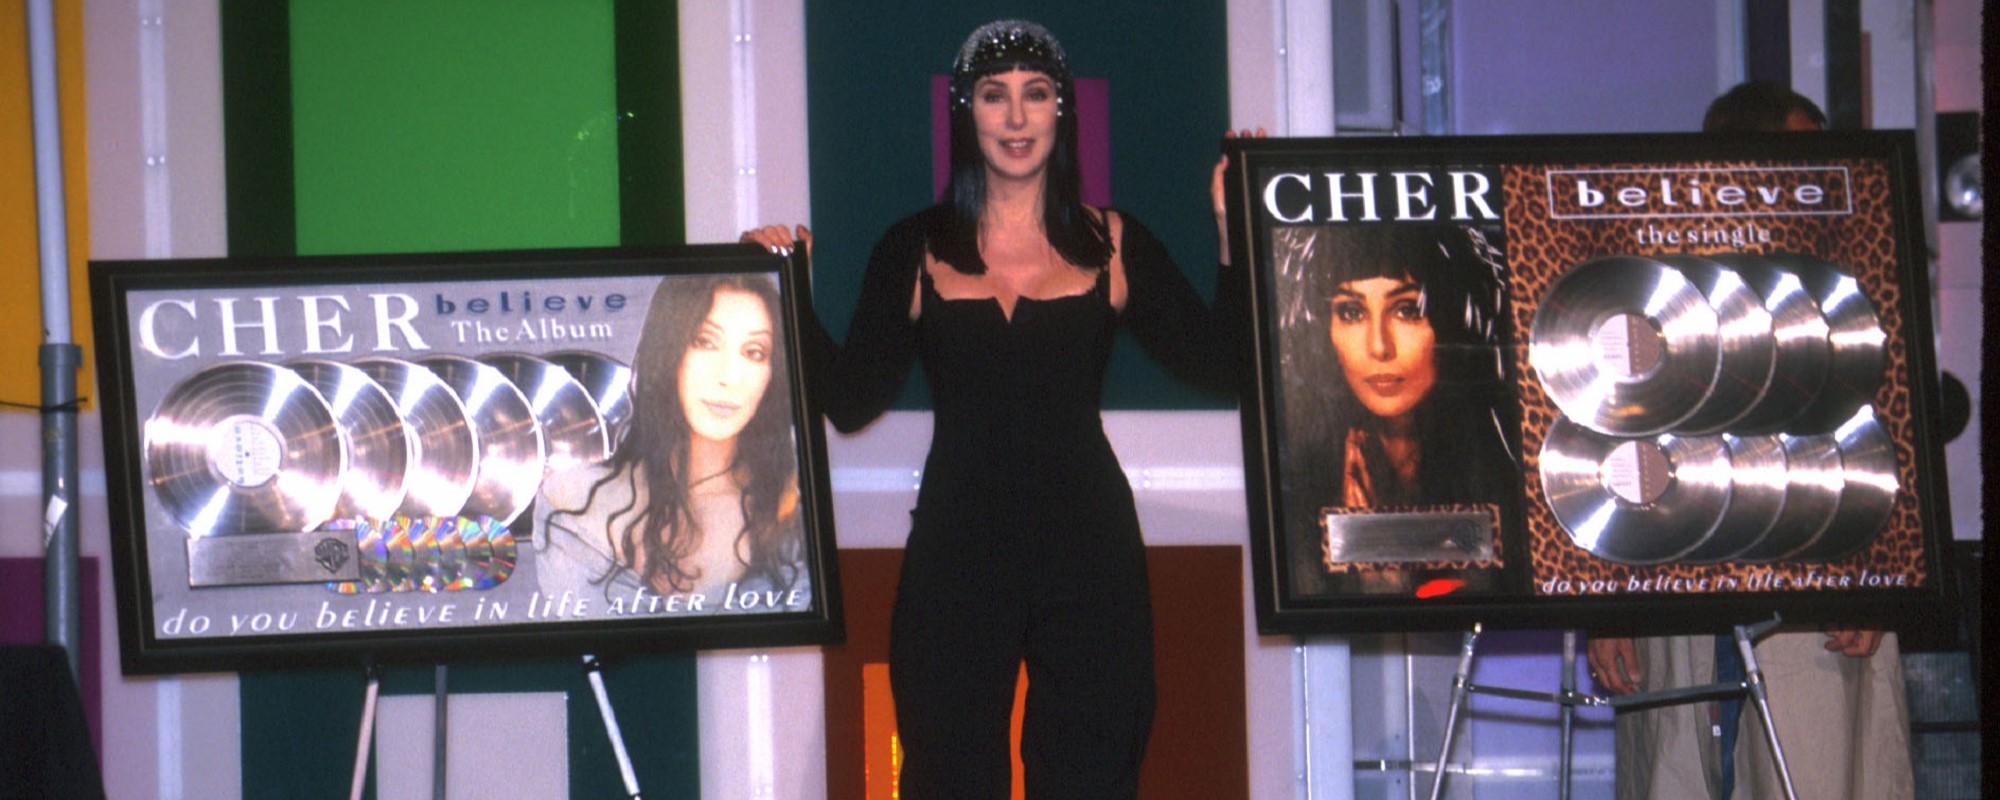 The Story Behind Cher’s Smash Hit “Believe,” Which Topped the ‘Billboard’ Charts 25 Years Ago